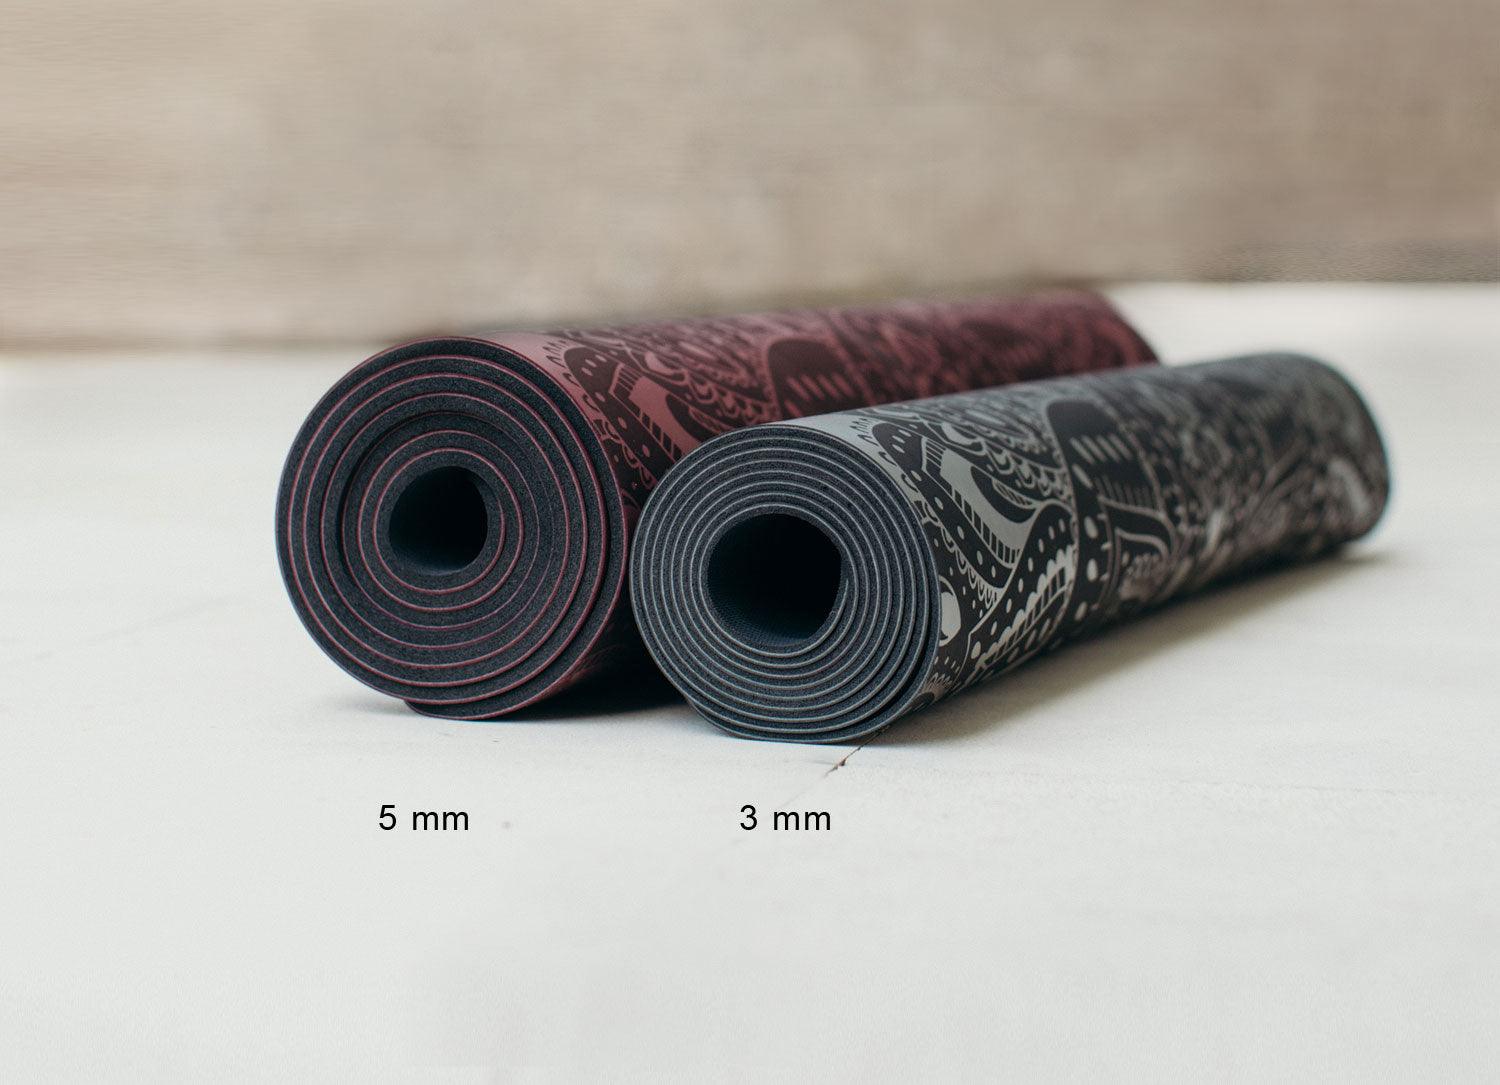 5 mm Yoga Sticky Mat with Printed Flower Design